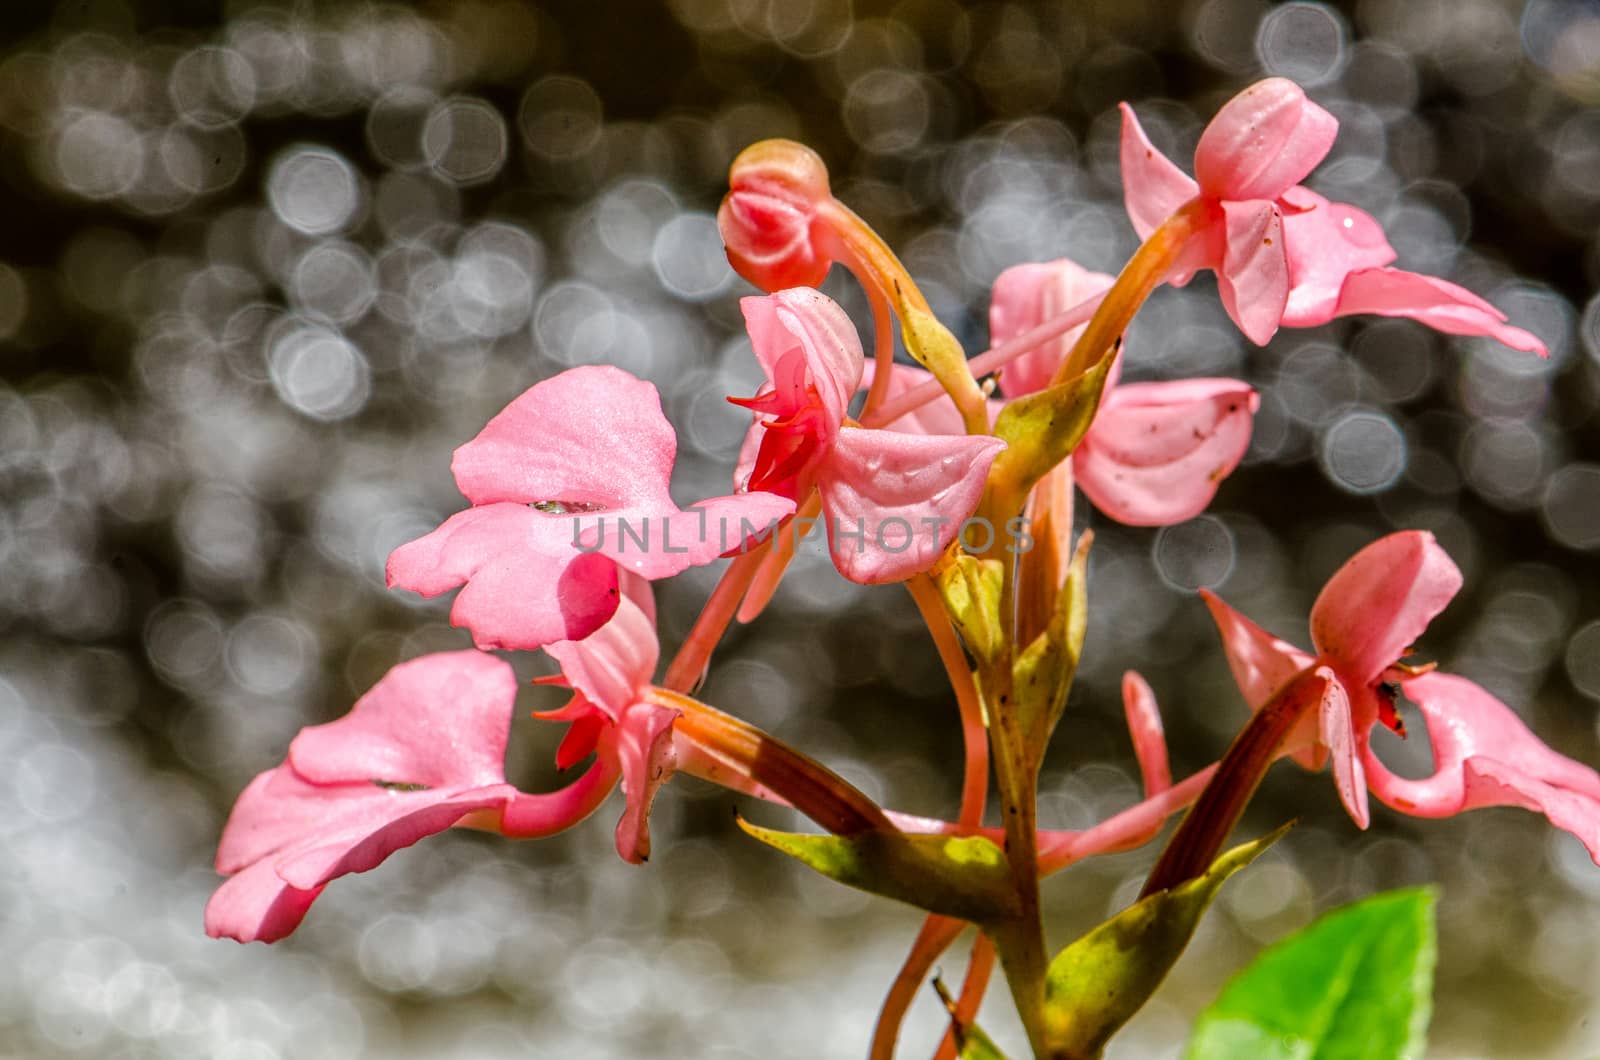 The Pink-Lipped Rhodocheila Habenaria (Pink Snap Dragon Flower) found in tropical rainforests at "Mundeang" waterfall in Phu hin rong kra national park,Phitsanulok province,Thailand,defocused